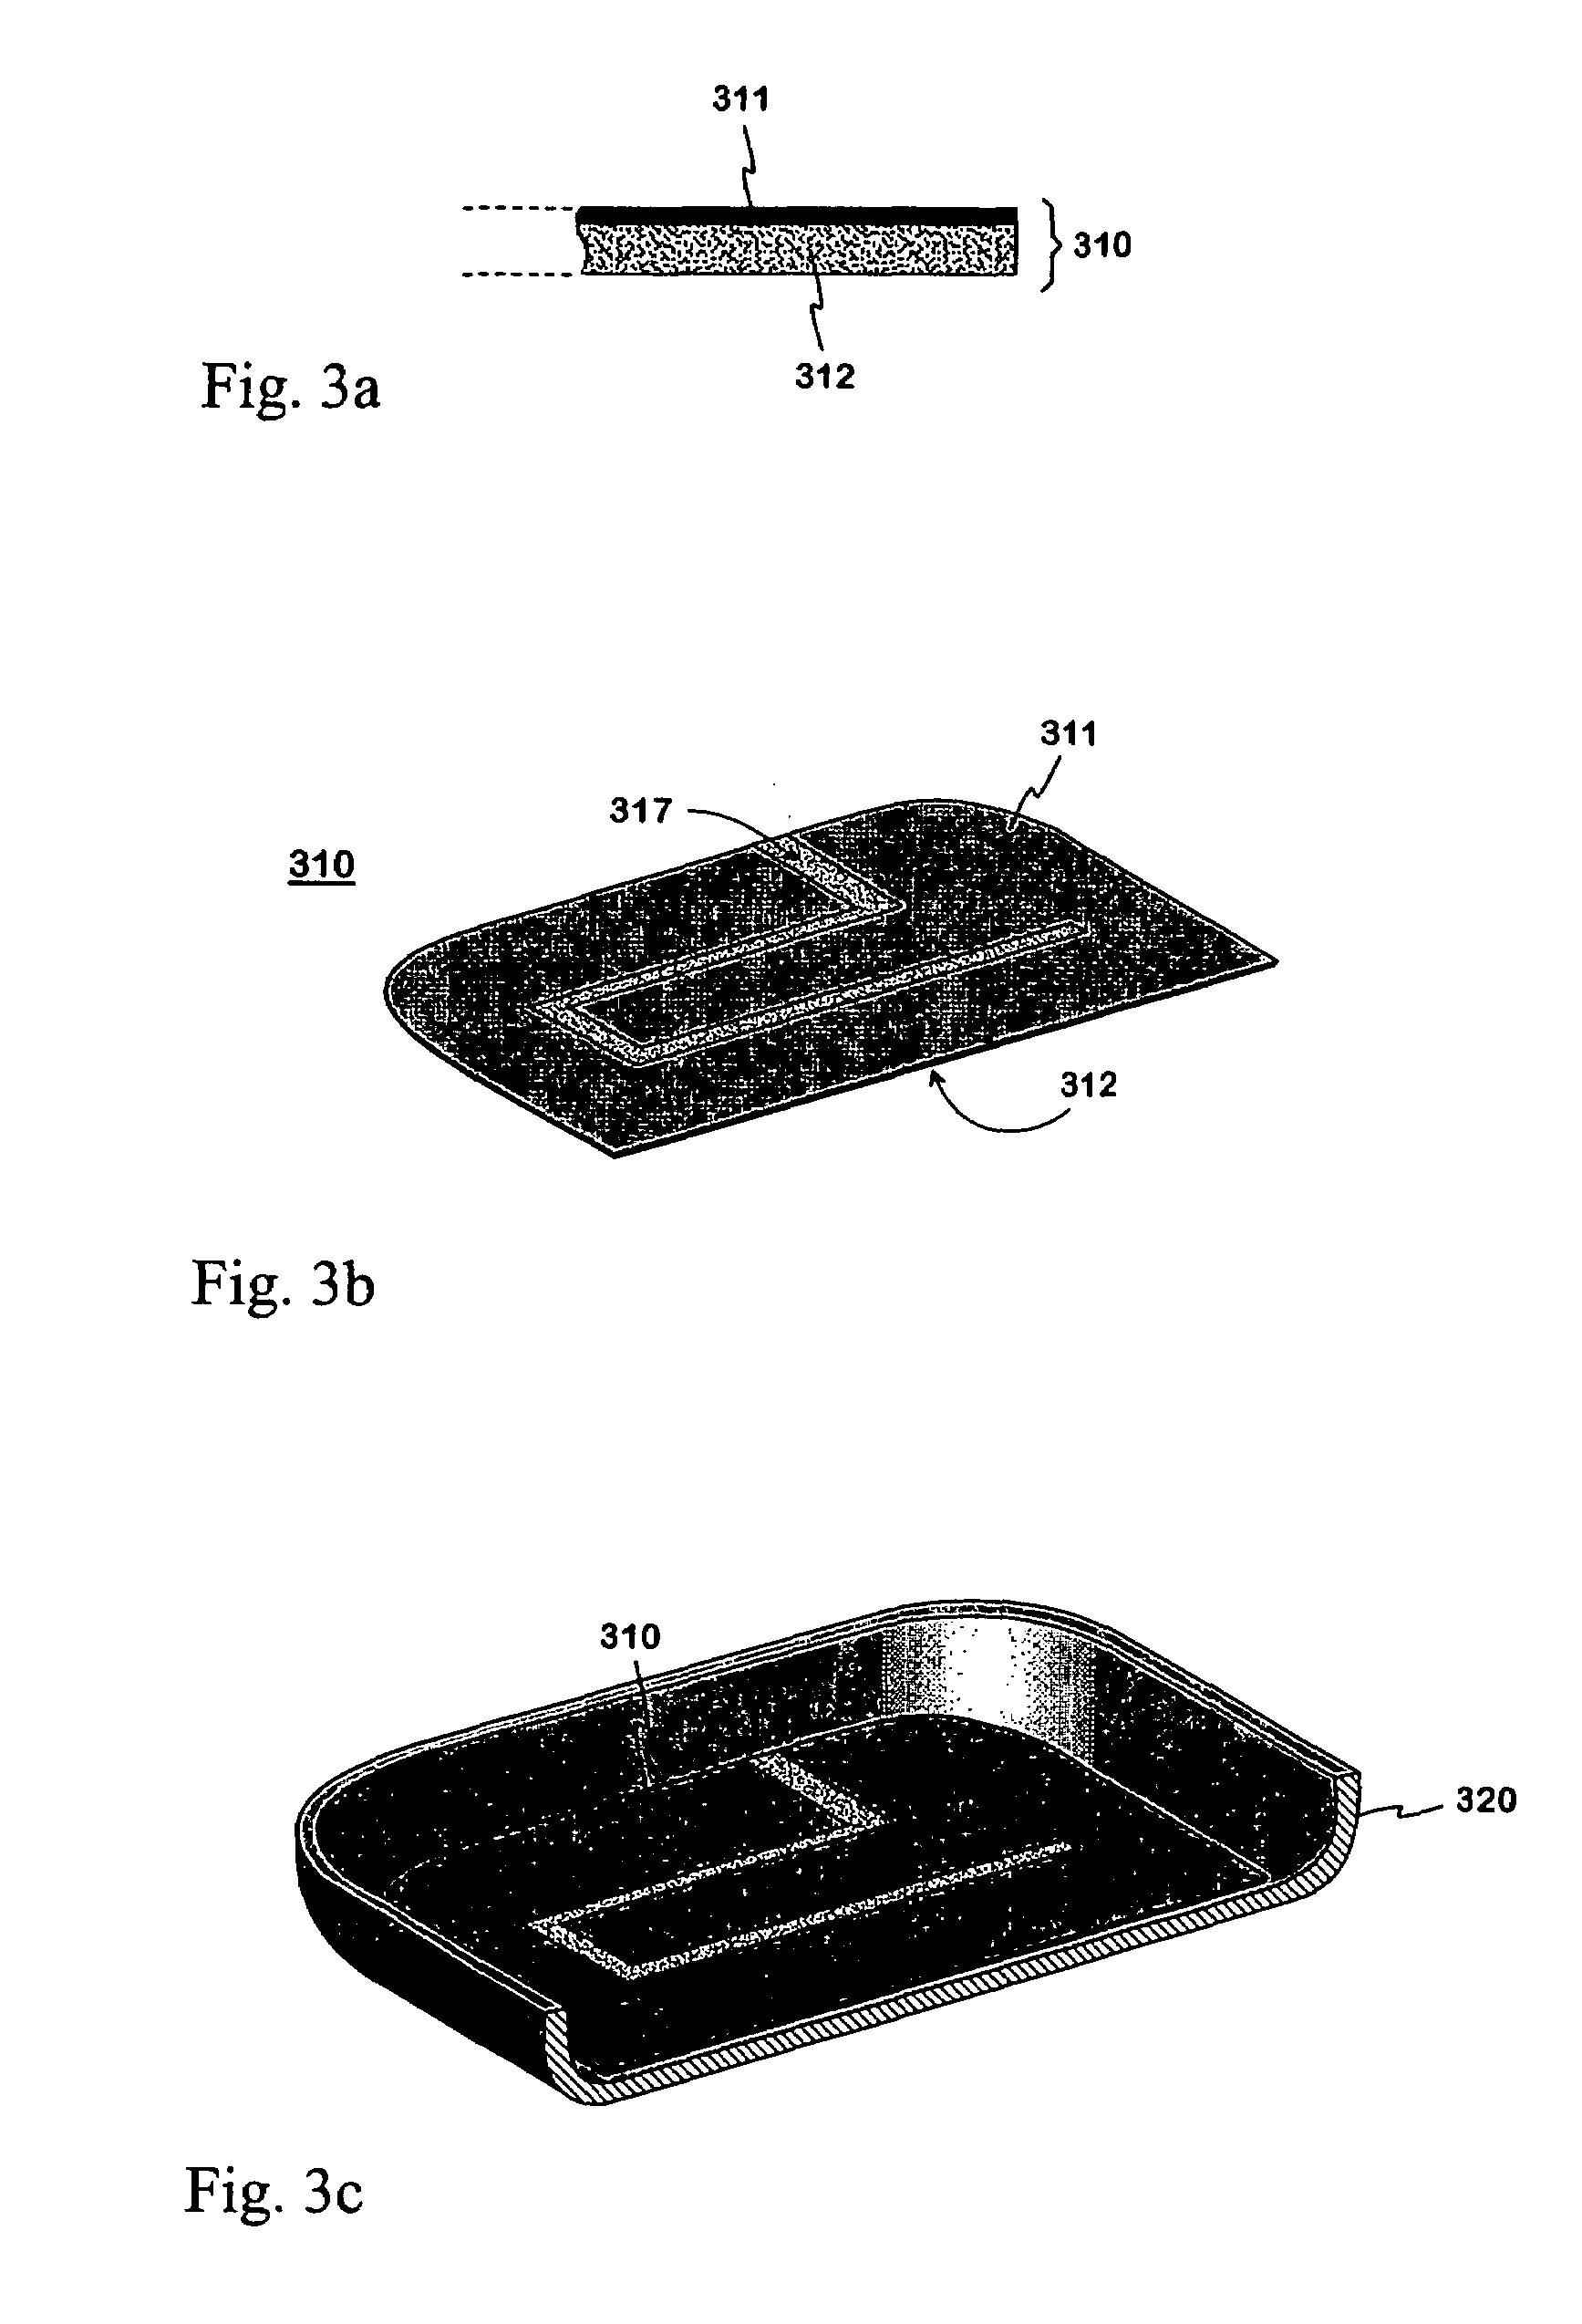 Method for mounting a radiator in a radio device and a radio device